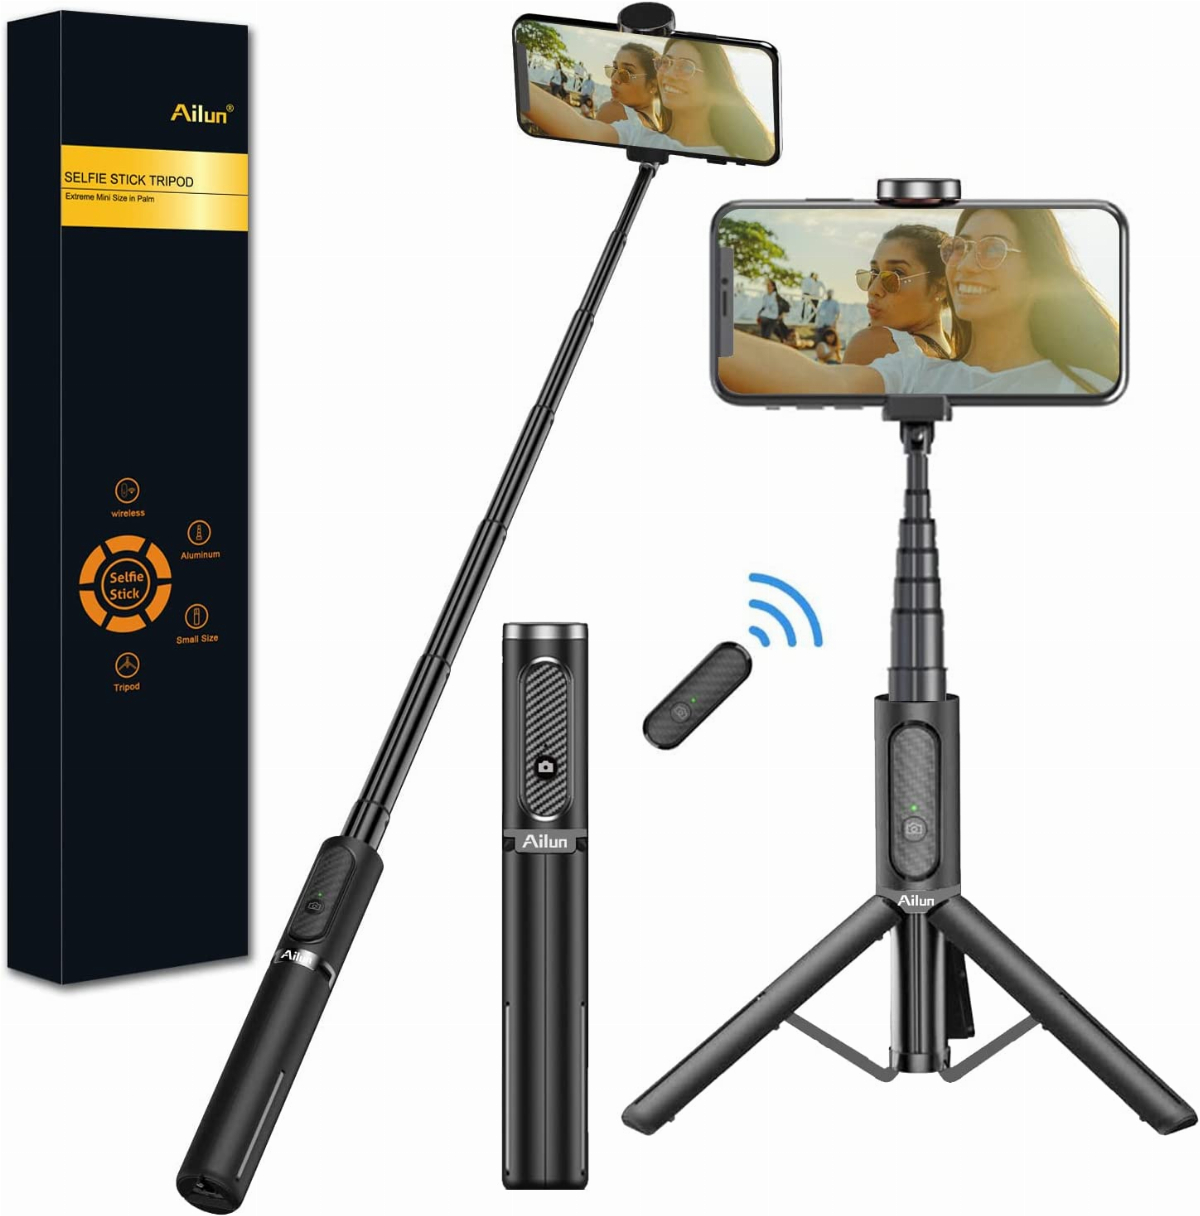 Extendable 3 in 1 Aluminum Bluetooth Selfie Stick with Wireless Remote for iPhone 12/11/11 Pro/XS Max/XS/XR/X/8/7 Red-Black ATUMTEK Selfie Stick Tripod Sony Smartphones Samsung LG Google 